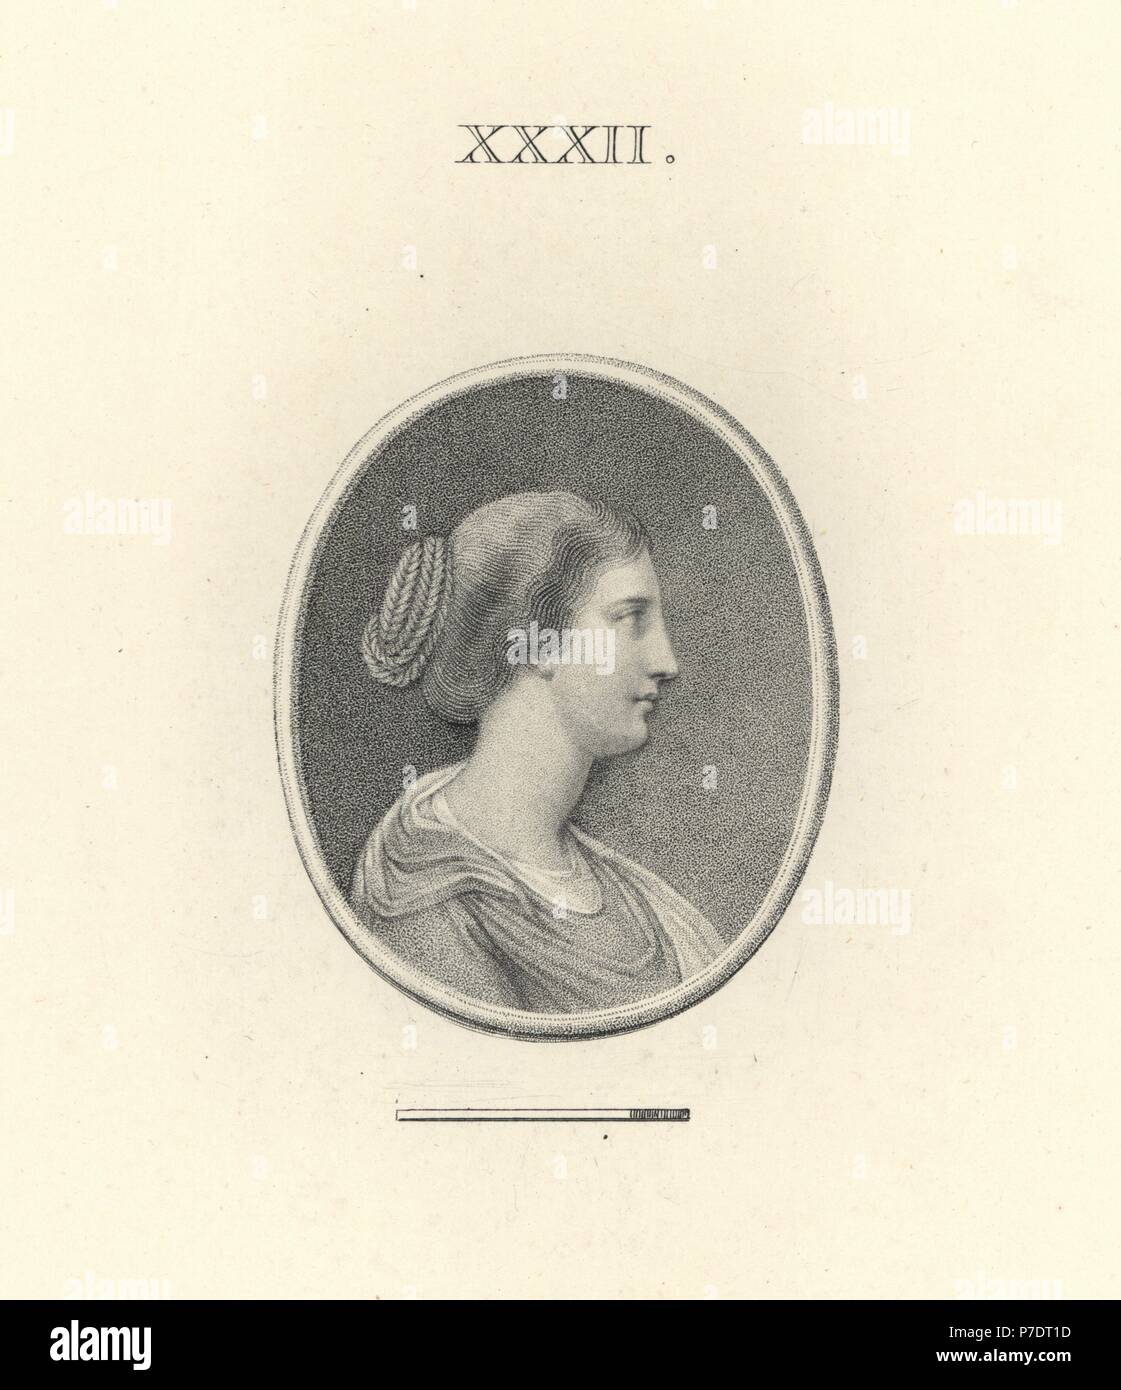 Annia Aurelia Galeria Lucilla or Lucilla, second daughter of Roman Emperor Marcus Aurelius and Roman Empress Faustina the Younger. Copperplate engraving by Francesco Bartolozzi from 108 Plates of Antique Gems, 1860. The gems were from the Duke of Marlborough's collection. Stock Photo